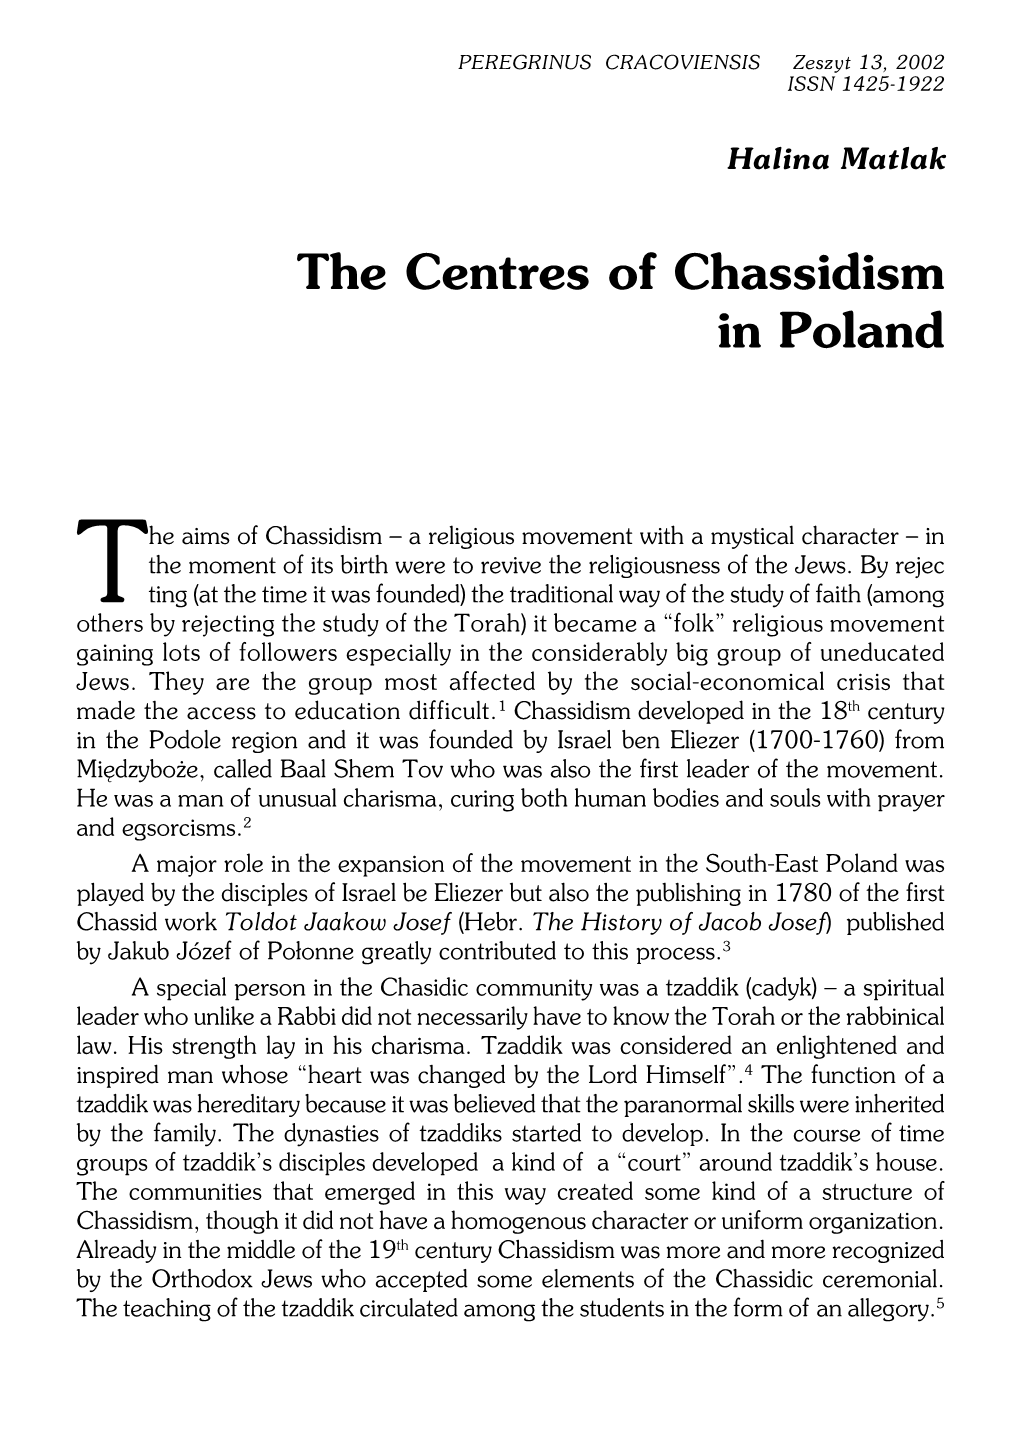 The Centres of Chassidism in Poland